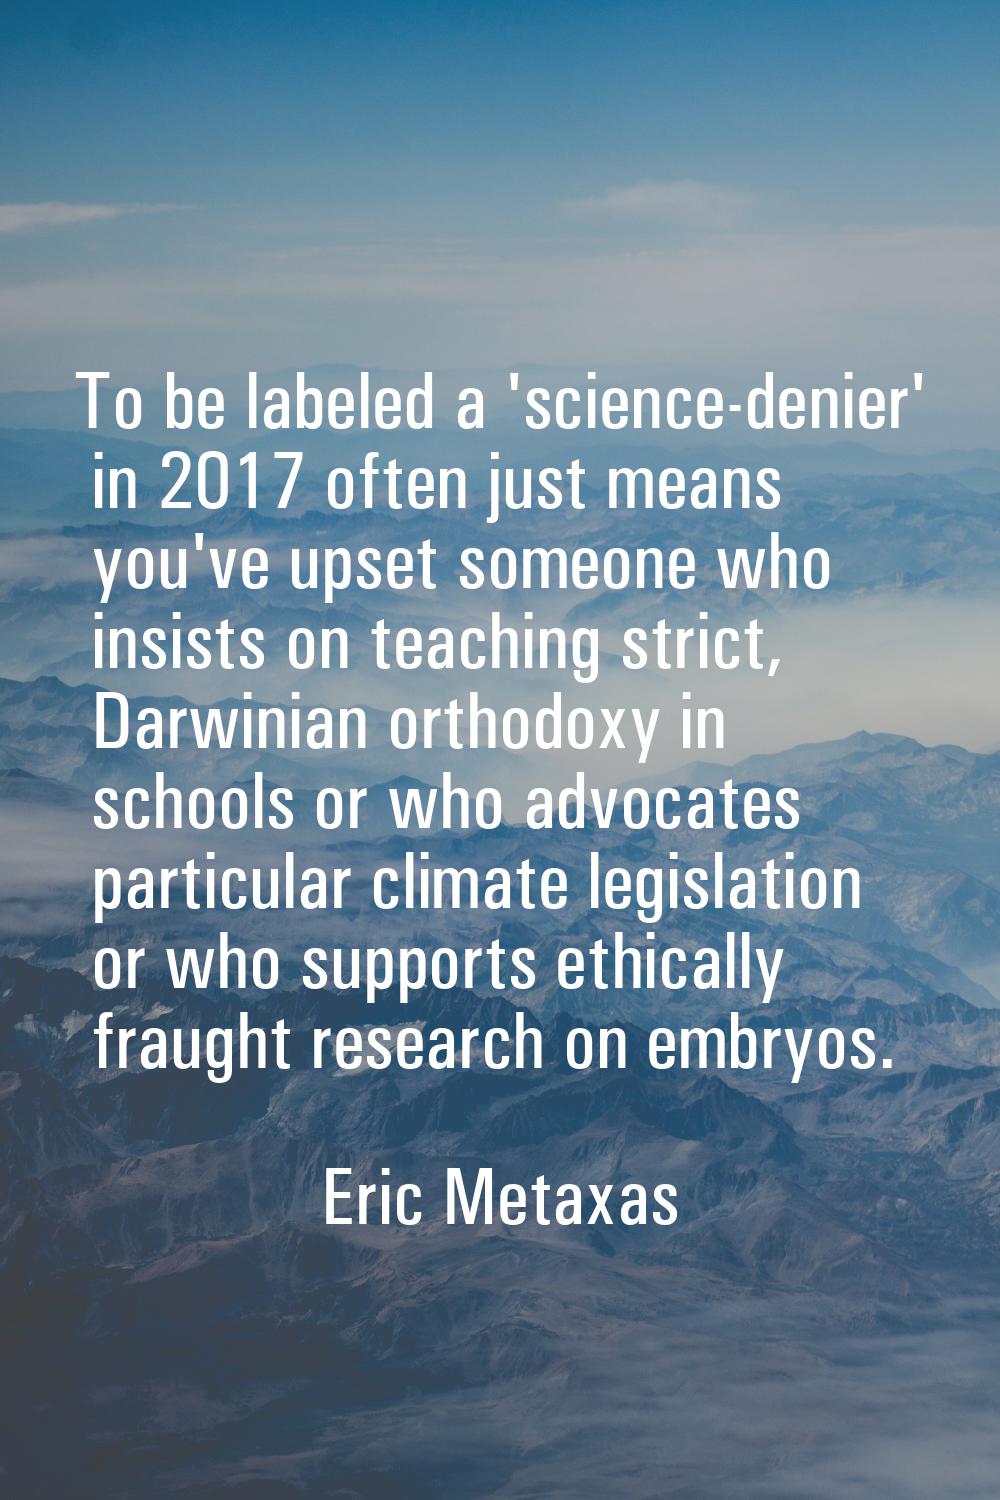 To be labeled a 'science-denier' in 2017 often just means you've upset someone who insists on teach